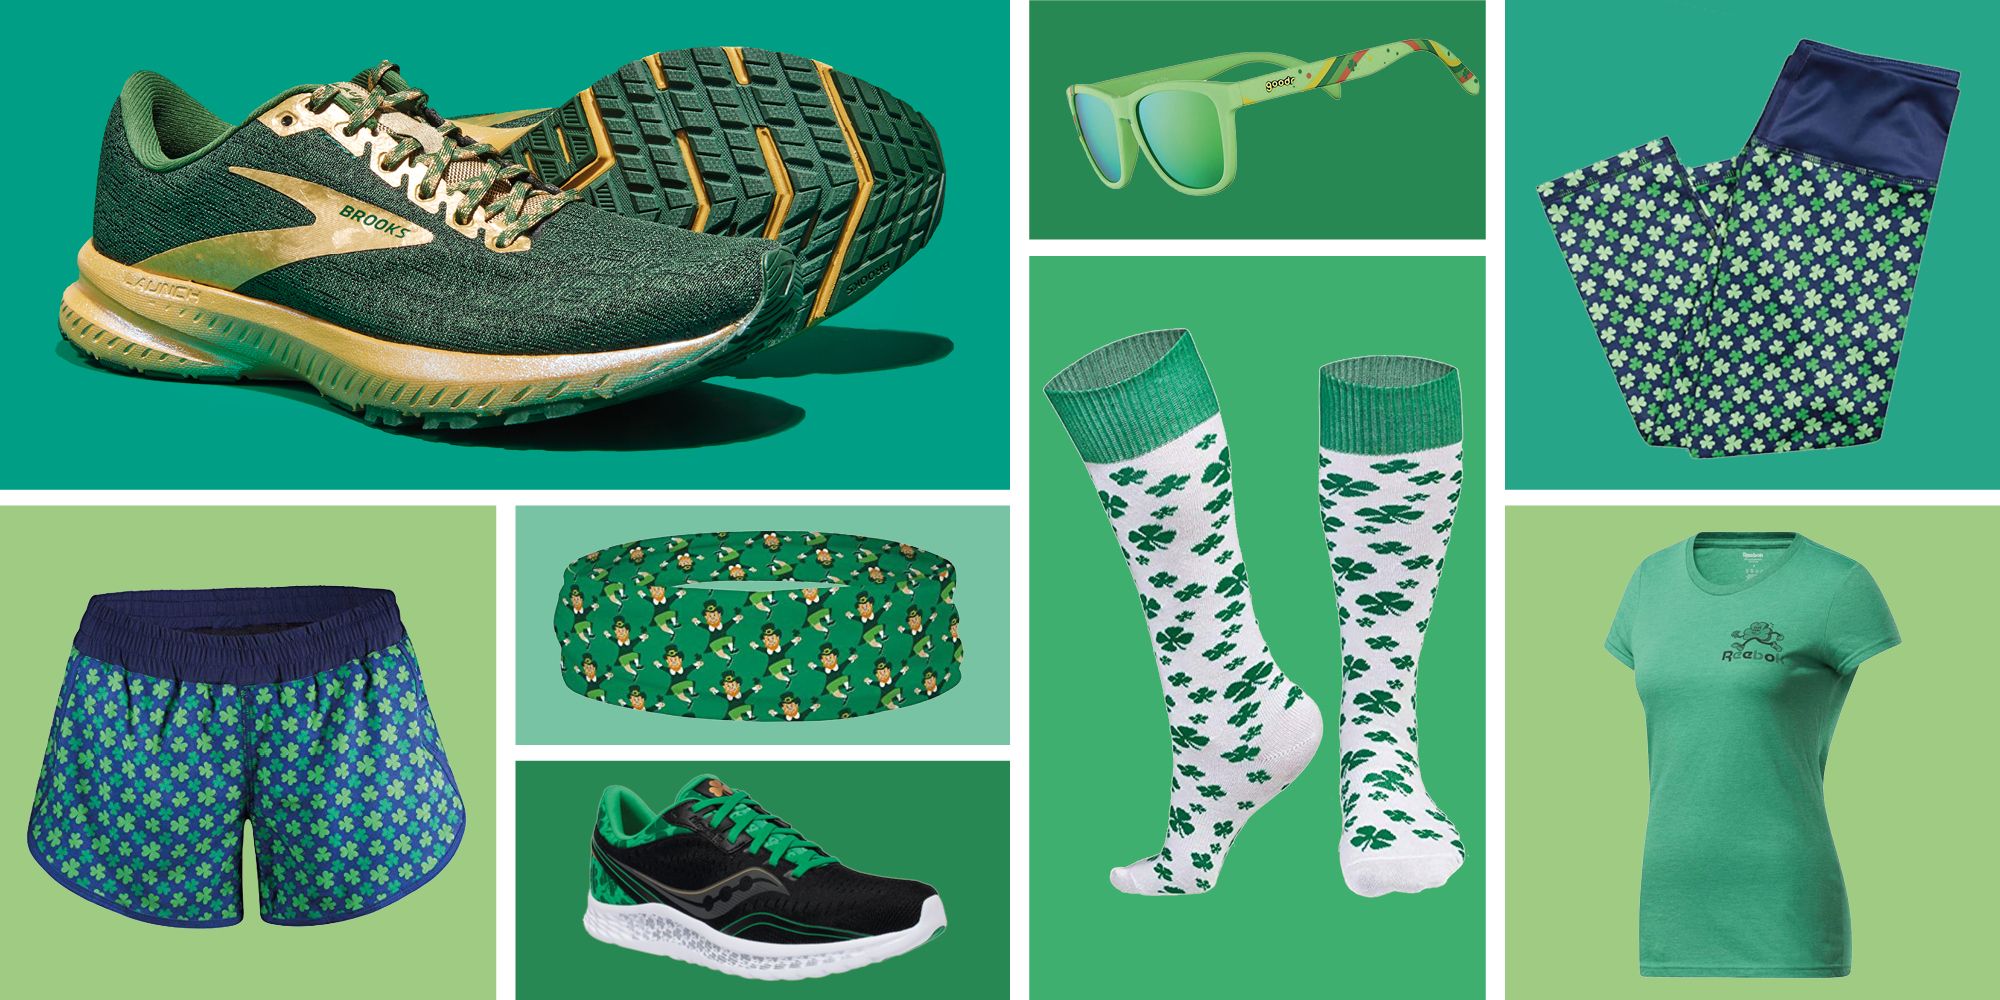 brooks st patrick's day sneakers